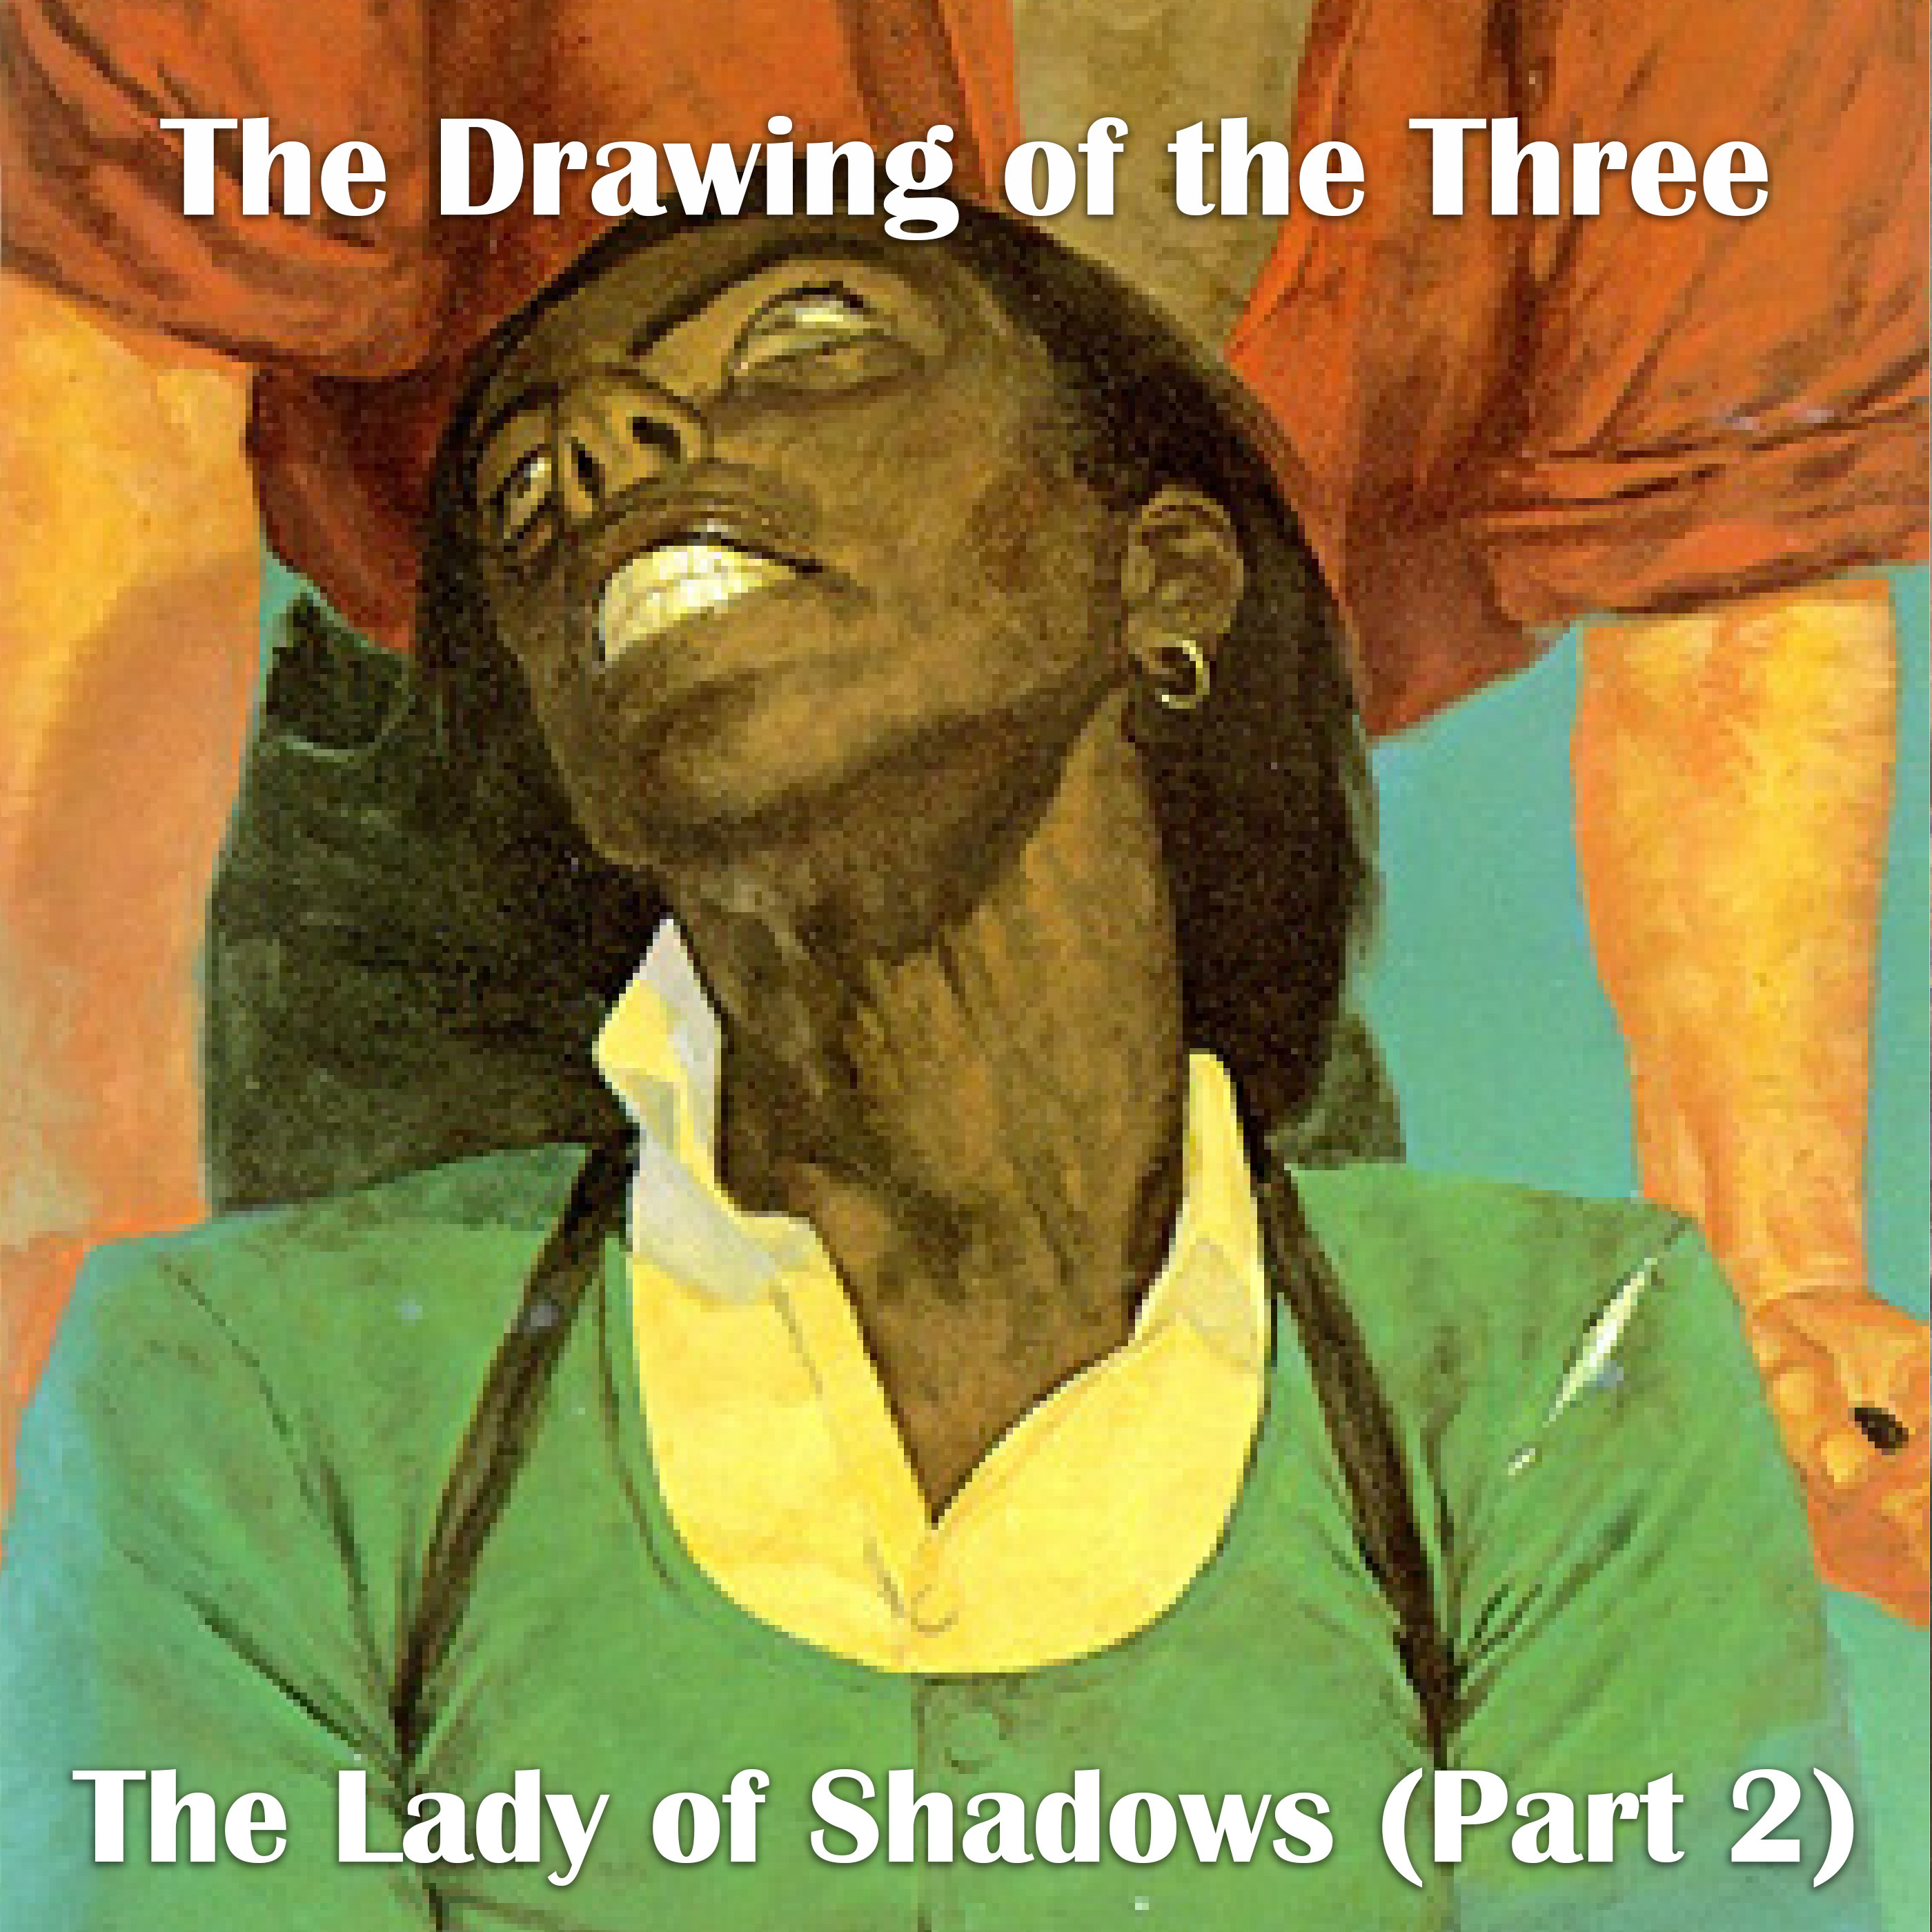 Episode 10: The Drawing of the Three, ”The Lady of Shadows (Part 2)”